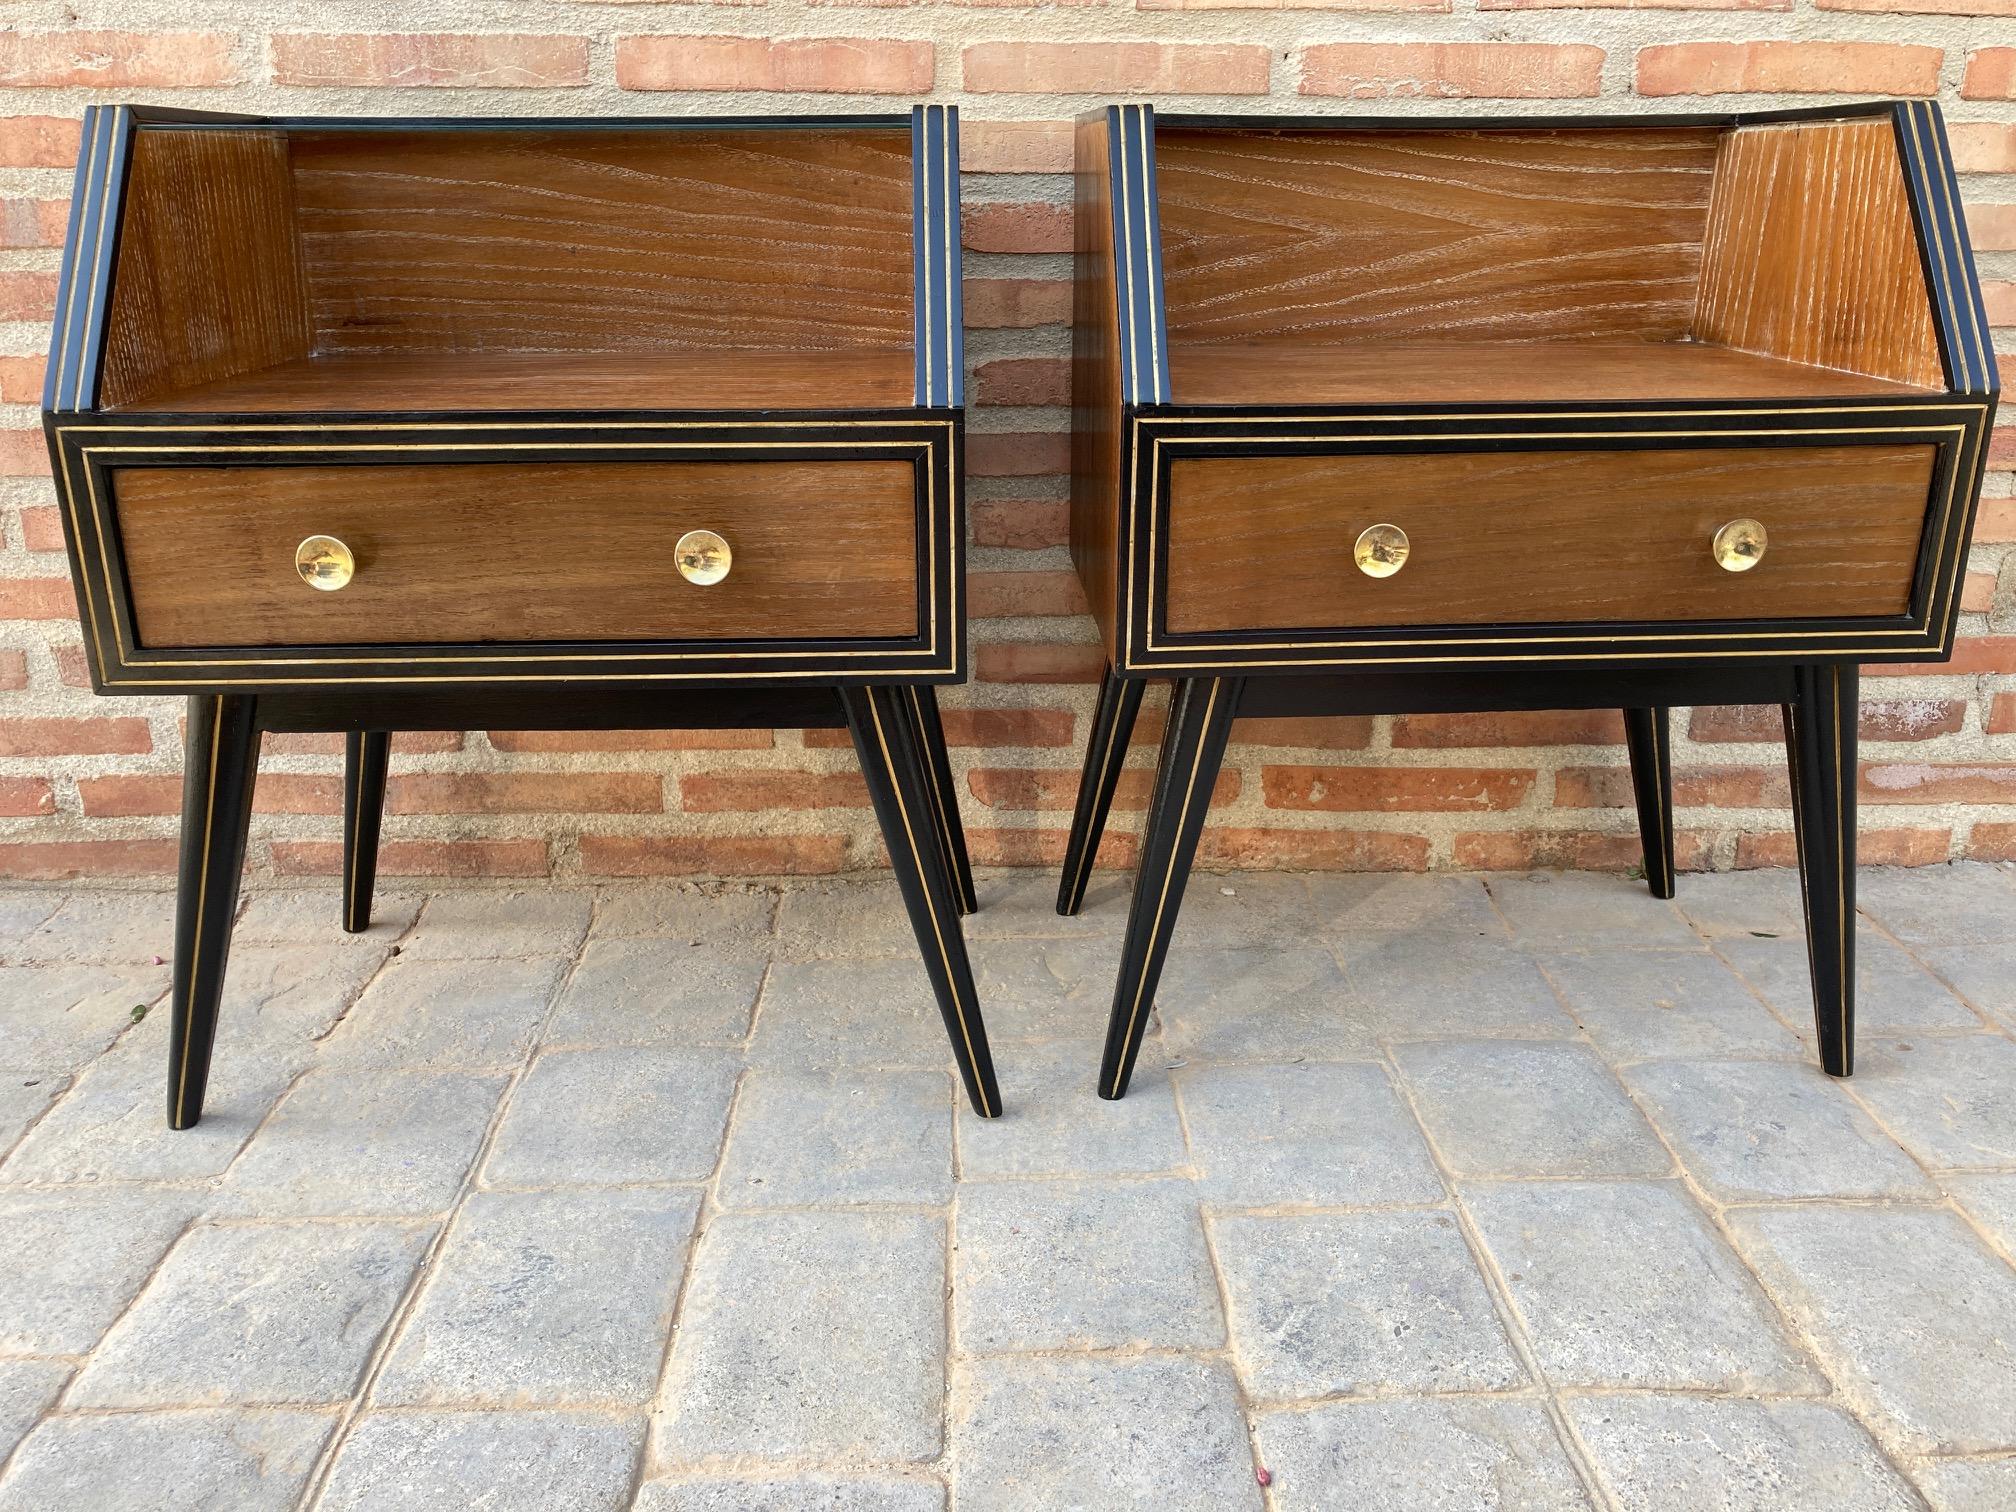 Elegant and stylized 1960s mid-century Italian nightstands, with clear glass, on top. You can see the refined details like the elegant brass handles or the decoration on the sides. The inside of the drawers is warm, the legs end in a wonderful shape